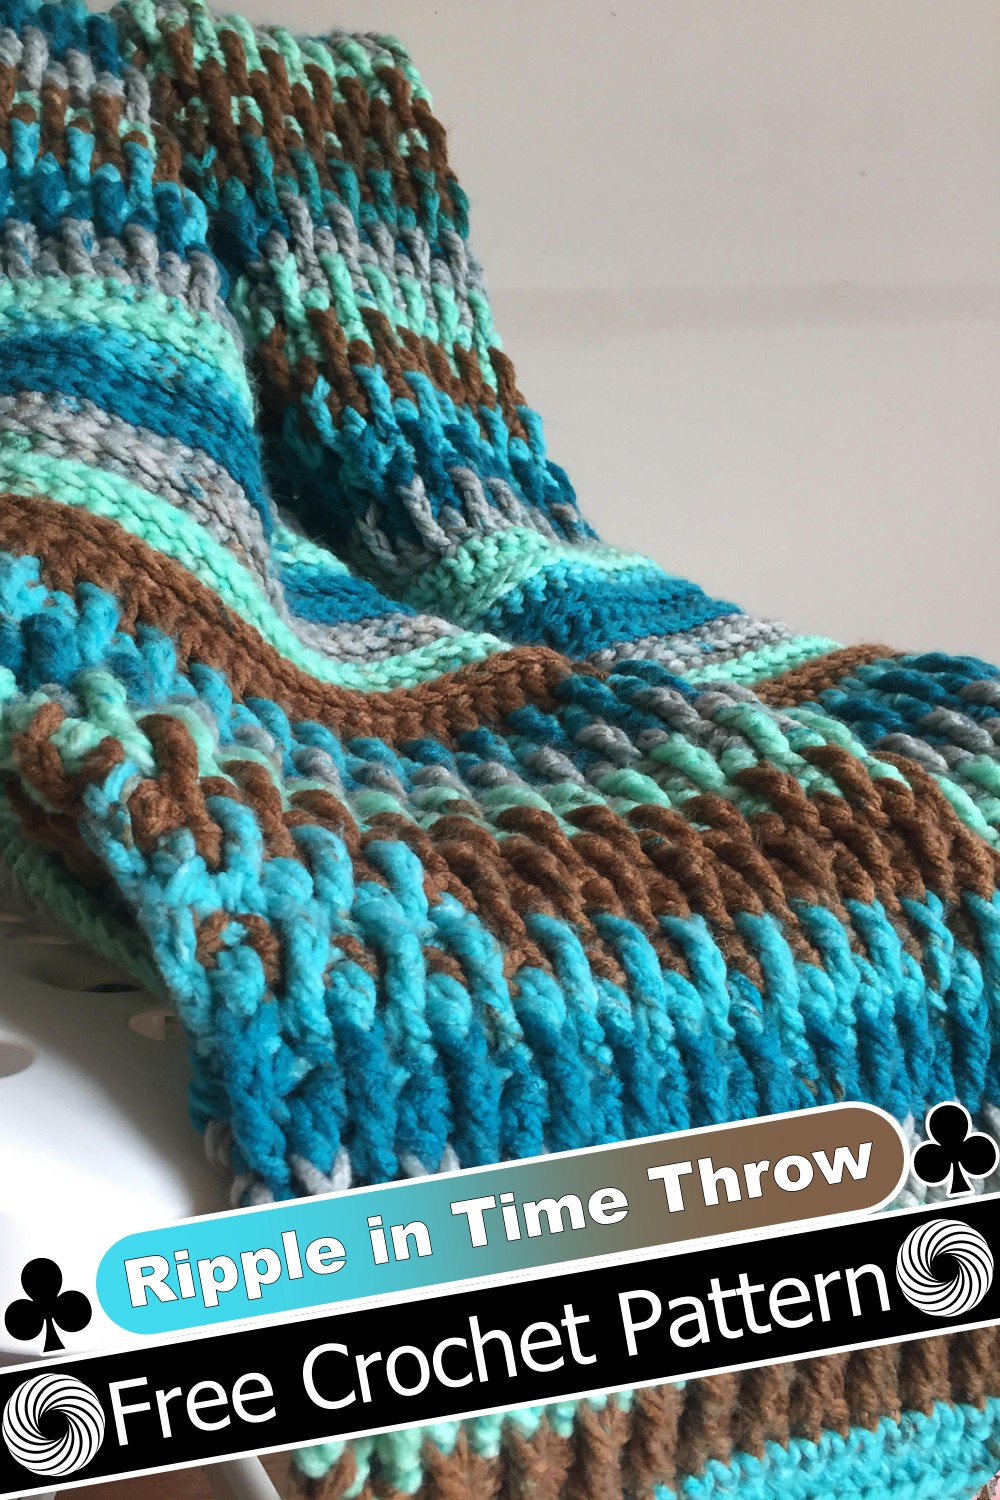 Ripple in Time Throw